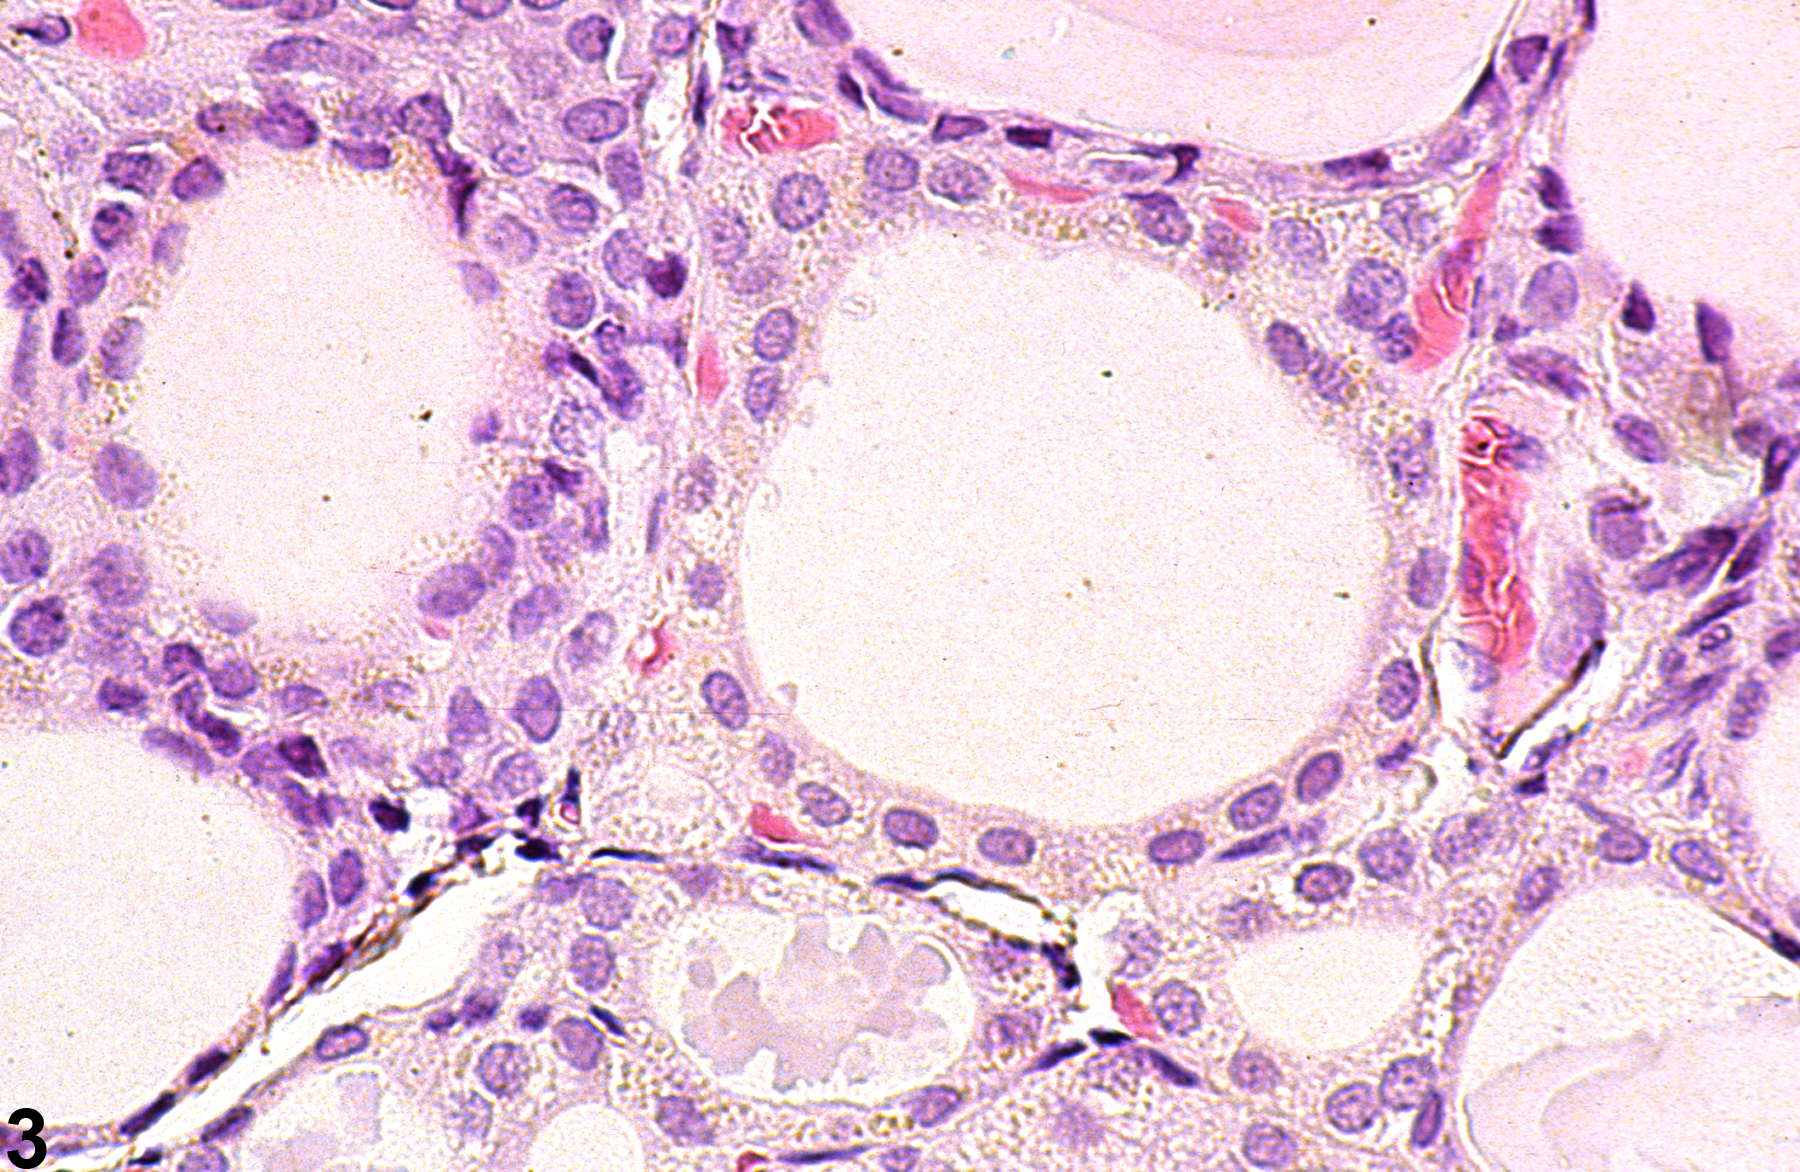 Image of follicle pigment in the thyroid gland from a male F344/N rat in a chronic study